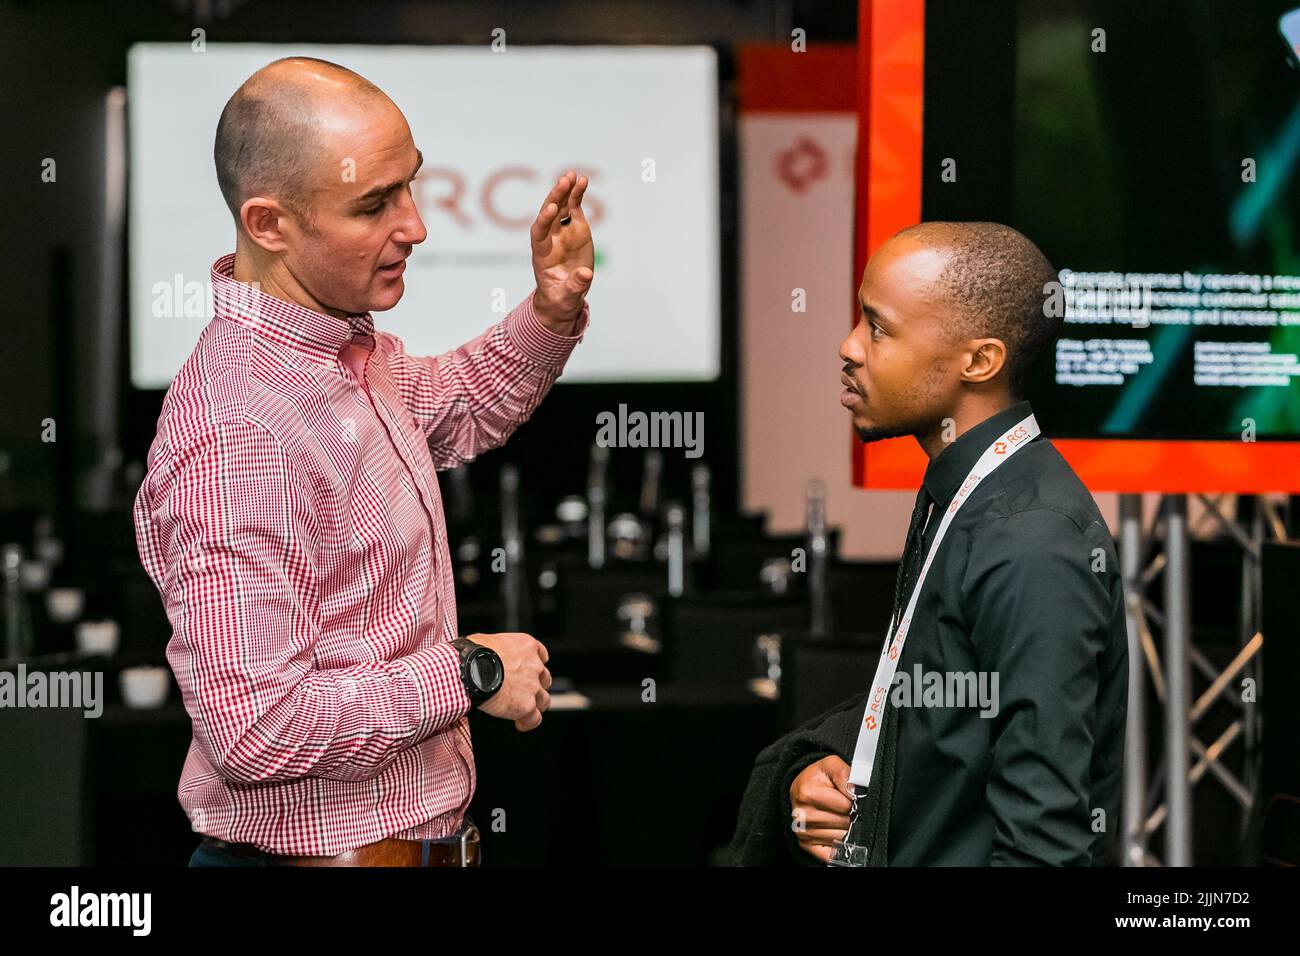 The vendors demonstrating a product service at a retail industry conference in Johannesburg,South Africa Stock Photo